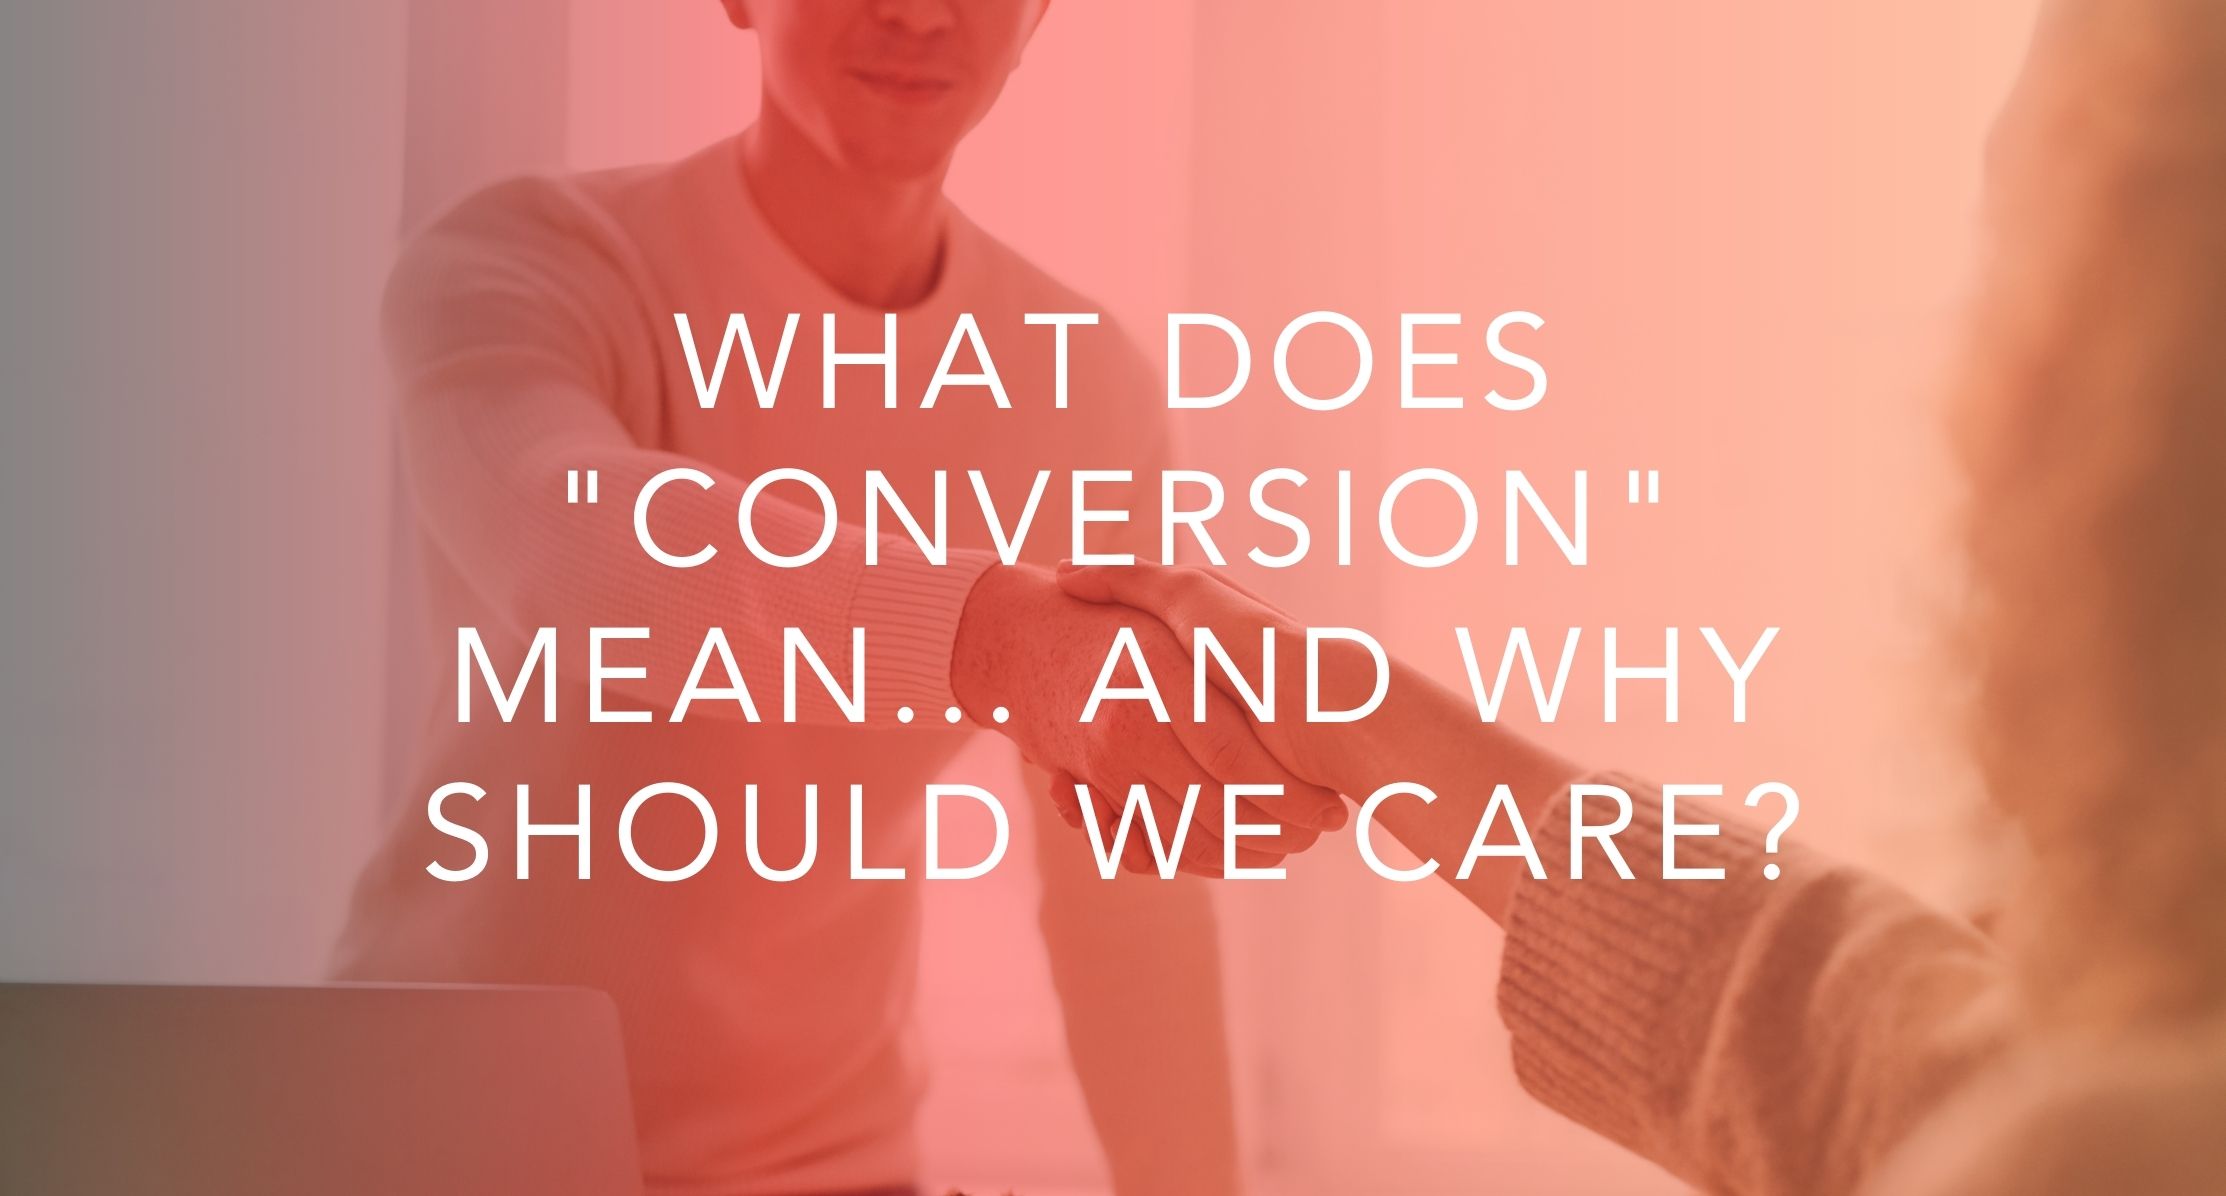 What does conversion mean and why should we care | Oh Snap Social